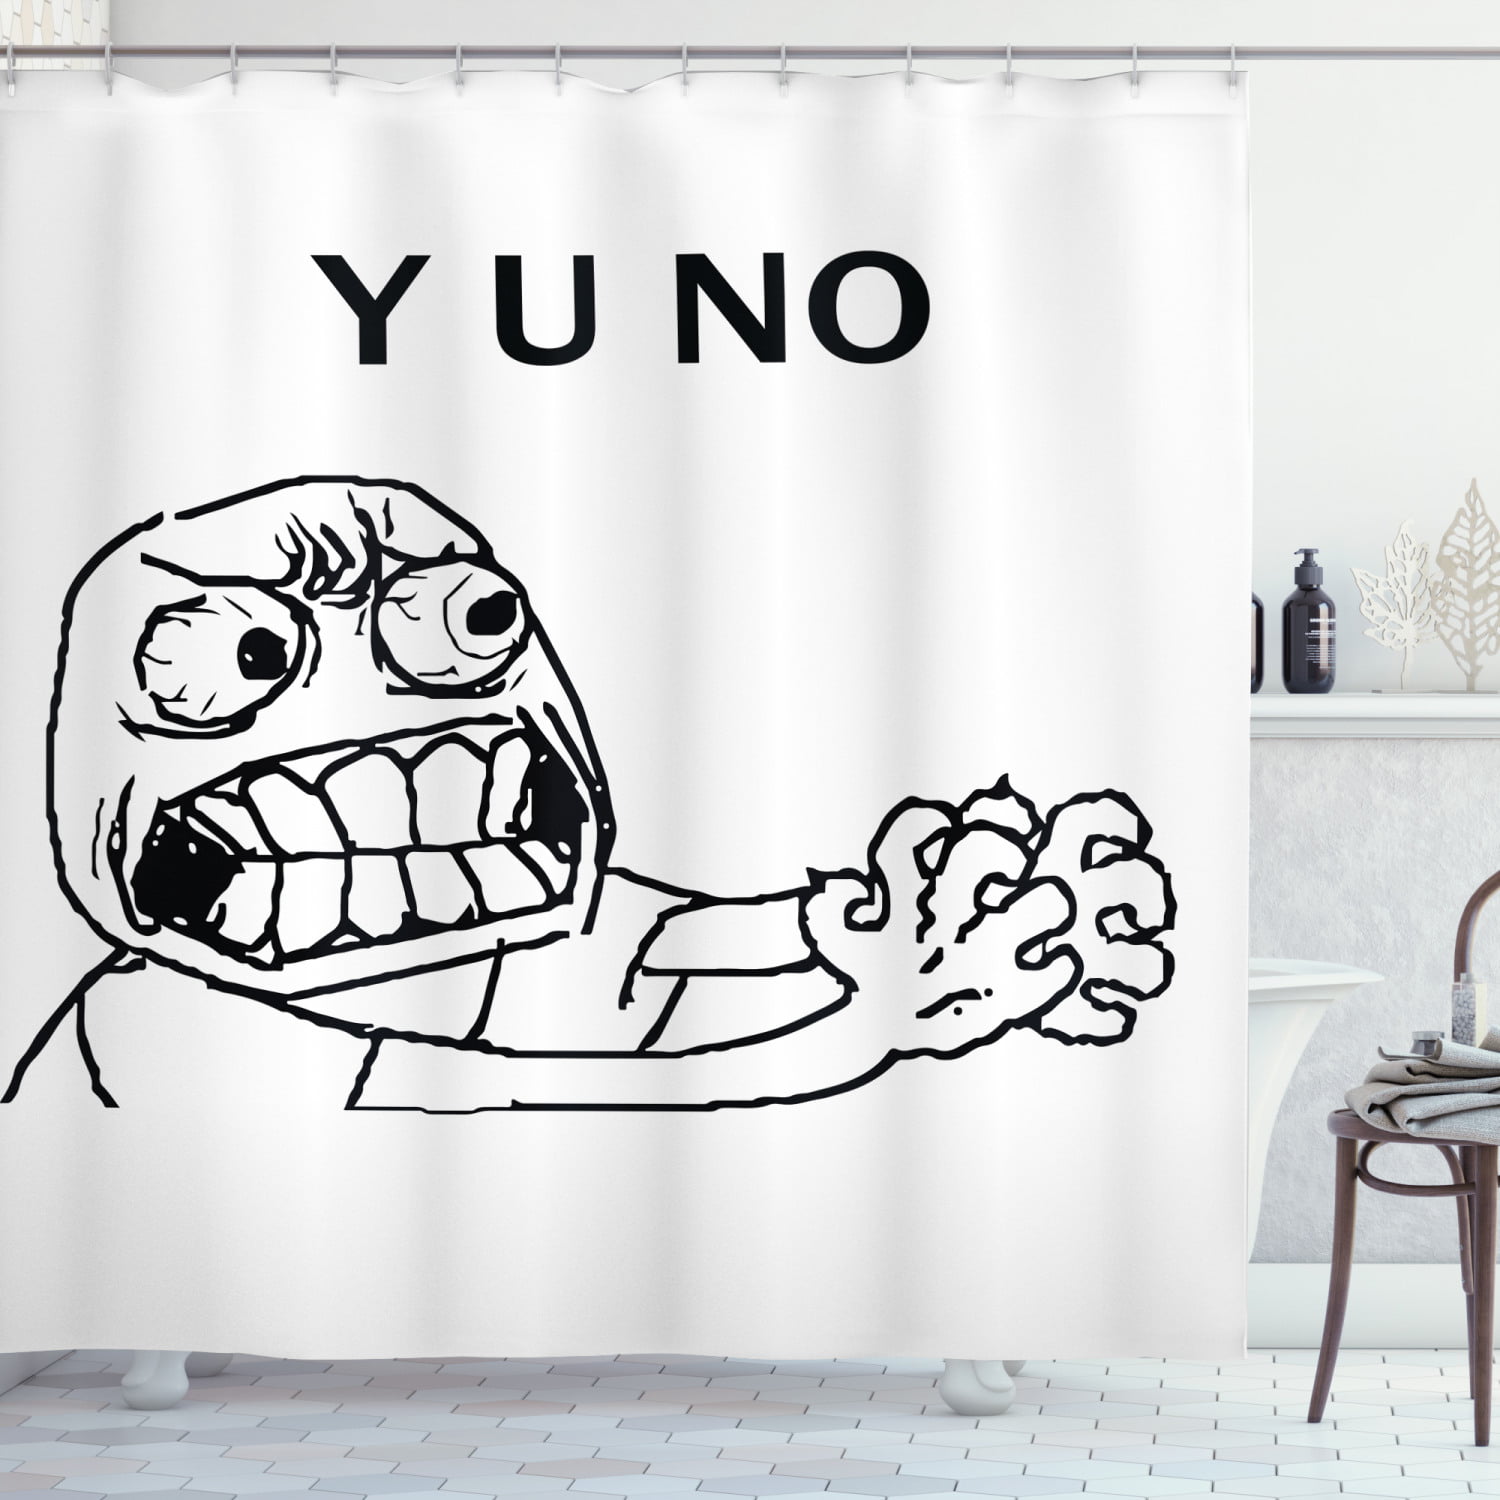 Humor Decor Shower Curtain Mascot Rage Guy Meme Face Figure With Big Eyes Full Of Anger Hipster Smile Art Fabric Bathroom Set With Hooks 69w X 70l Inches Black White By Ambesonne